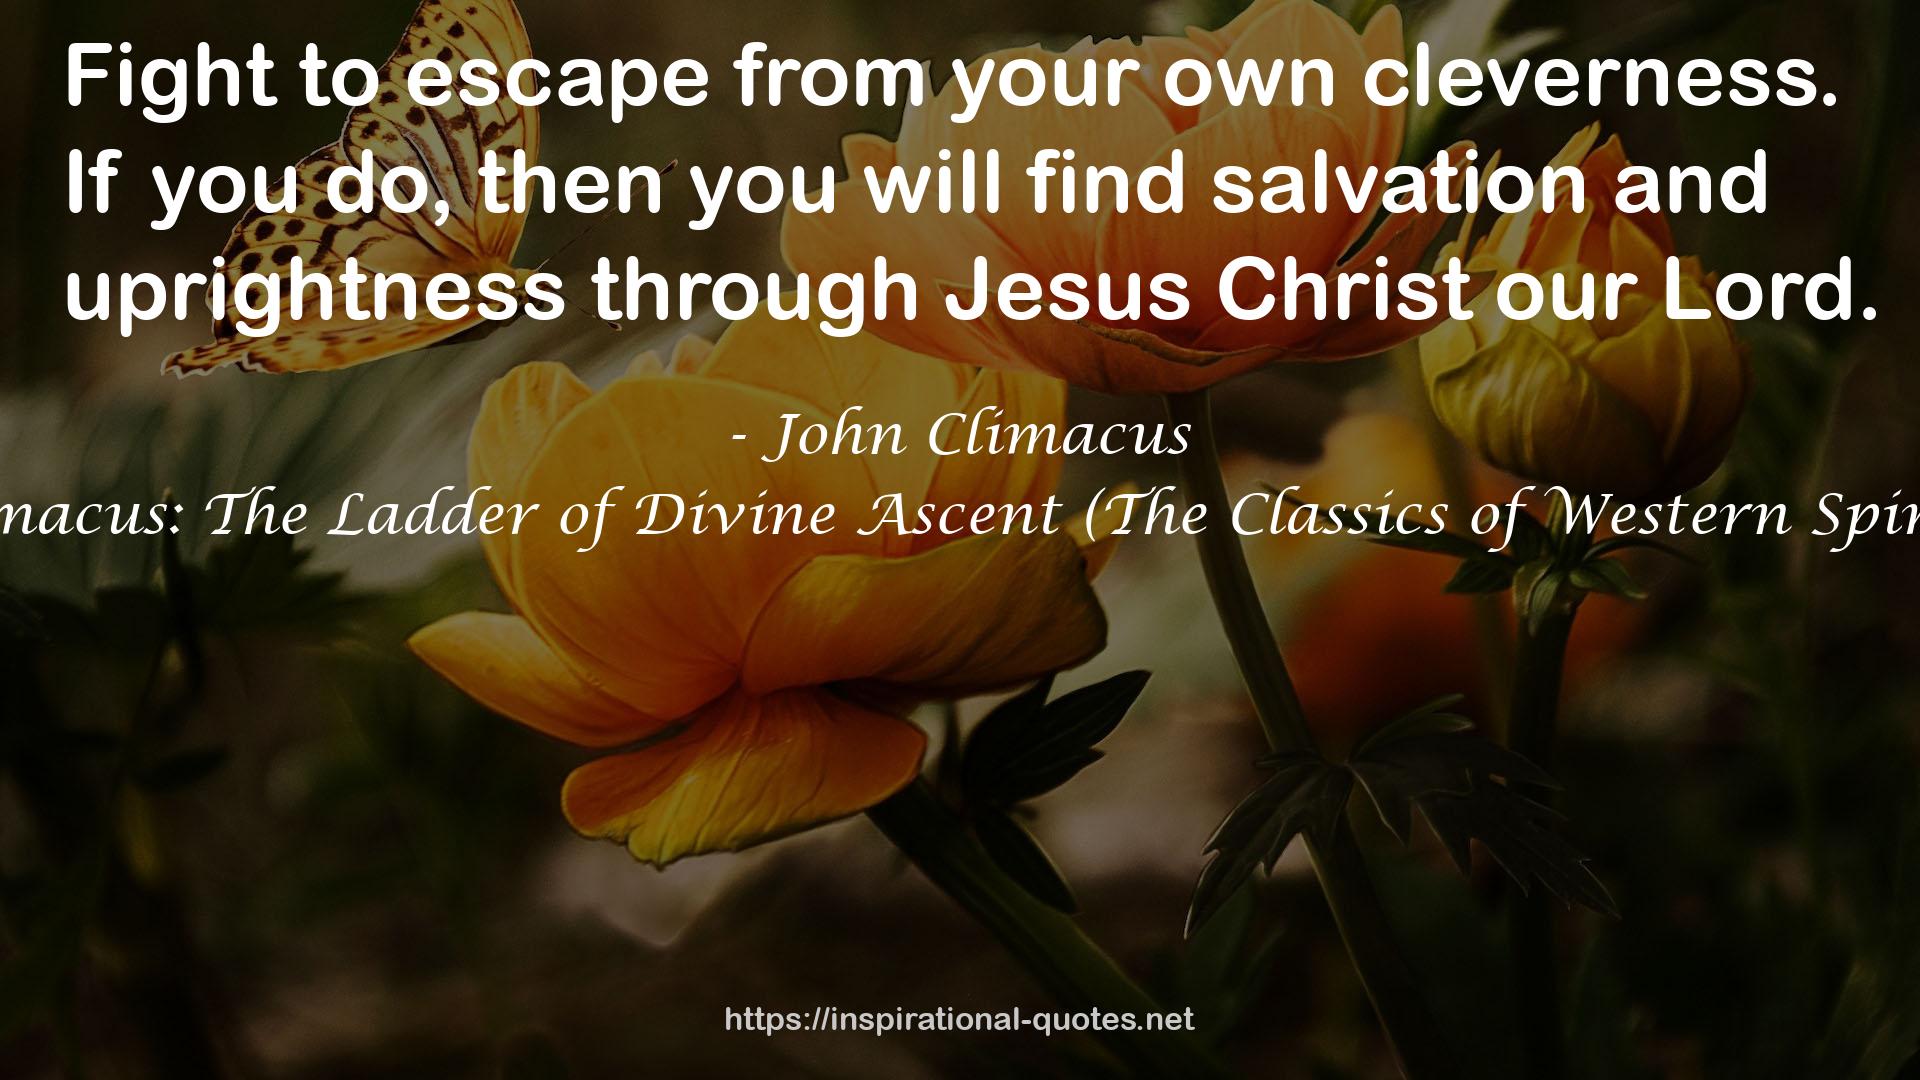 John Climacus: The Ladder of Divine Ascent (The Classics of Western Spirituality) QUOTES